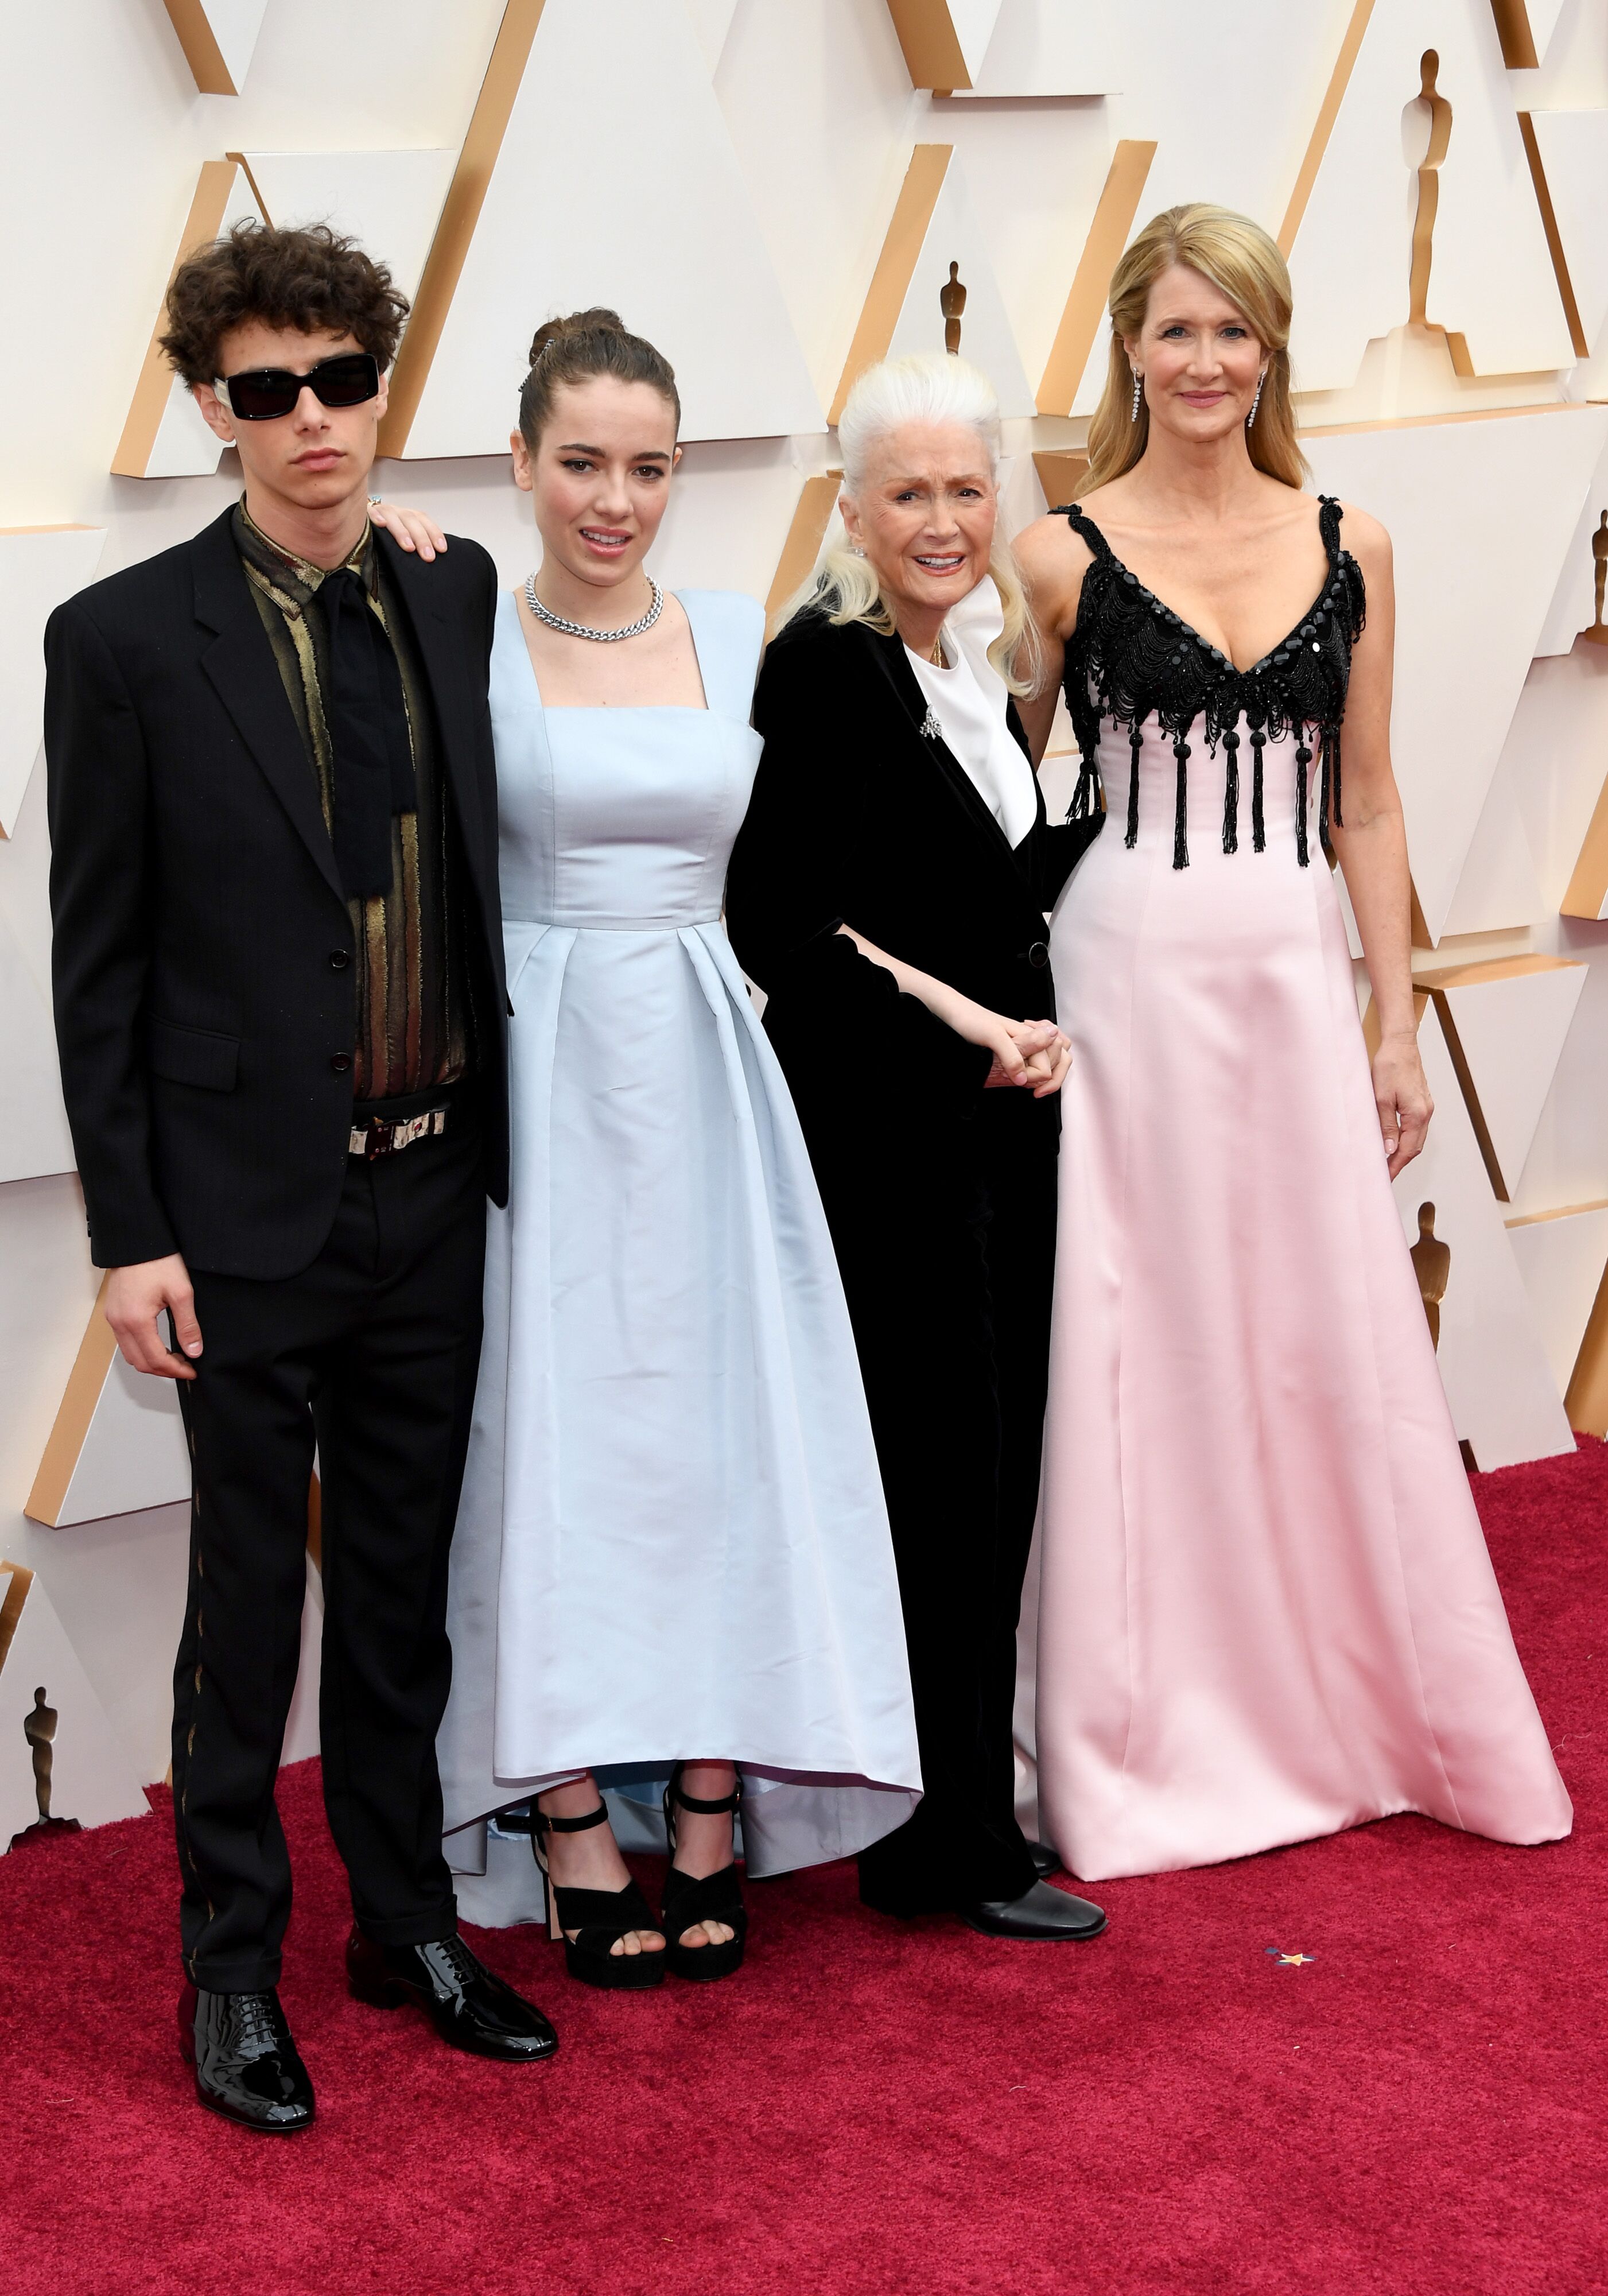 Ellery Harper, Jaya Harper, Diane Ladd, and Laura Dern attend the 92nd Annual Academy Awards at Hollywood and Highland on February 09, 2020 | Photo: Getty Images